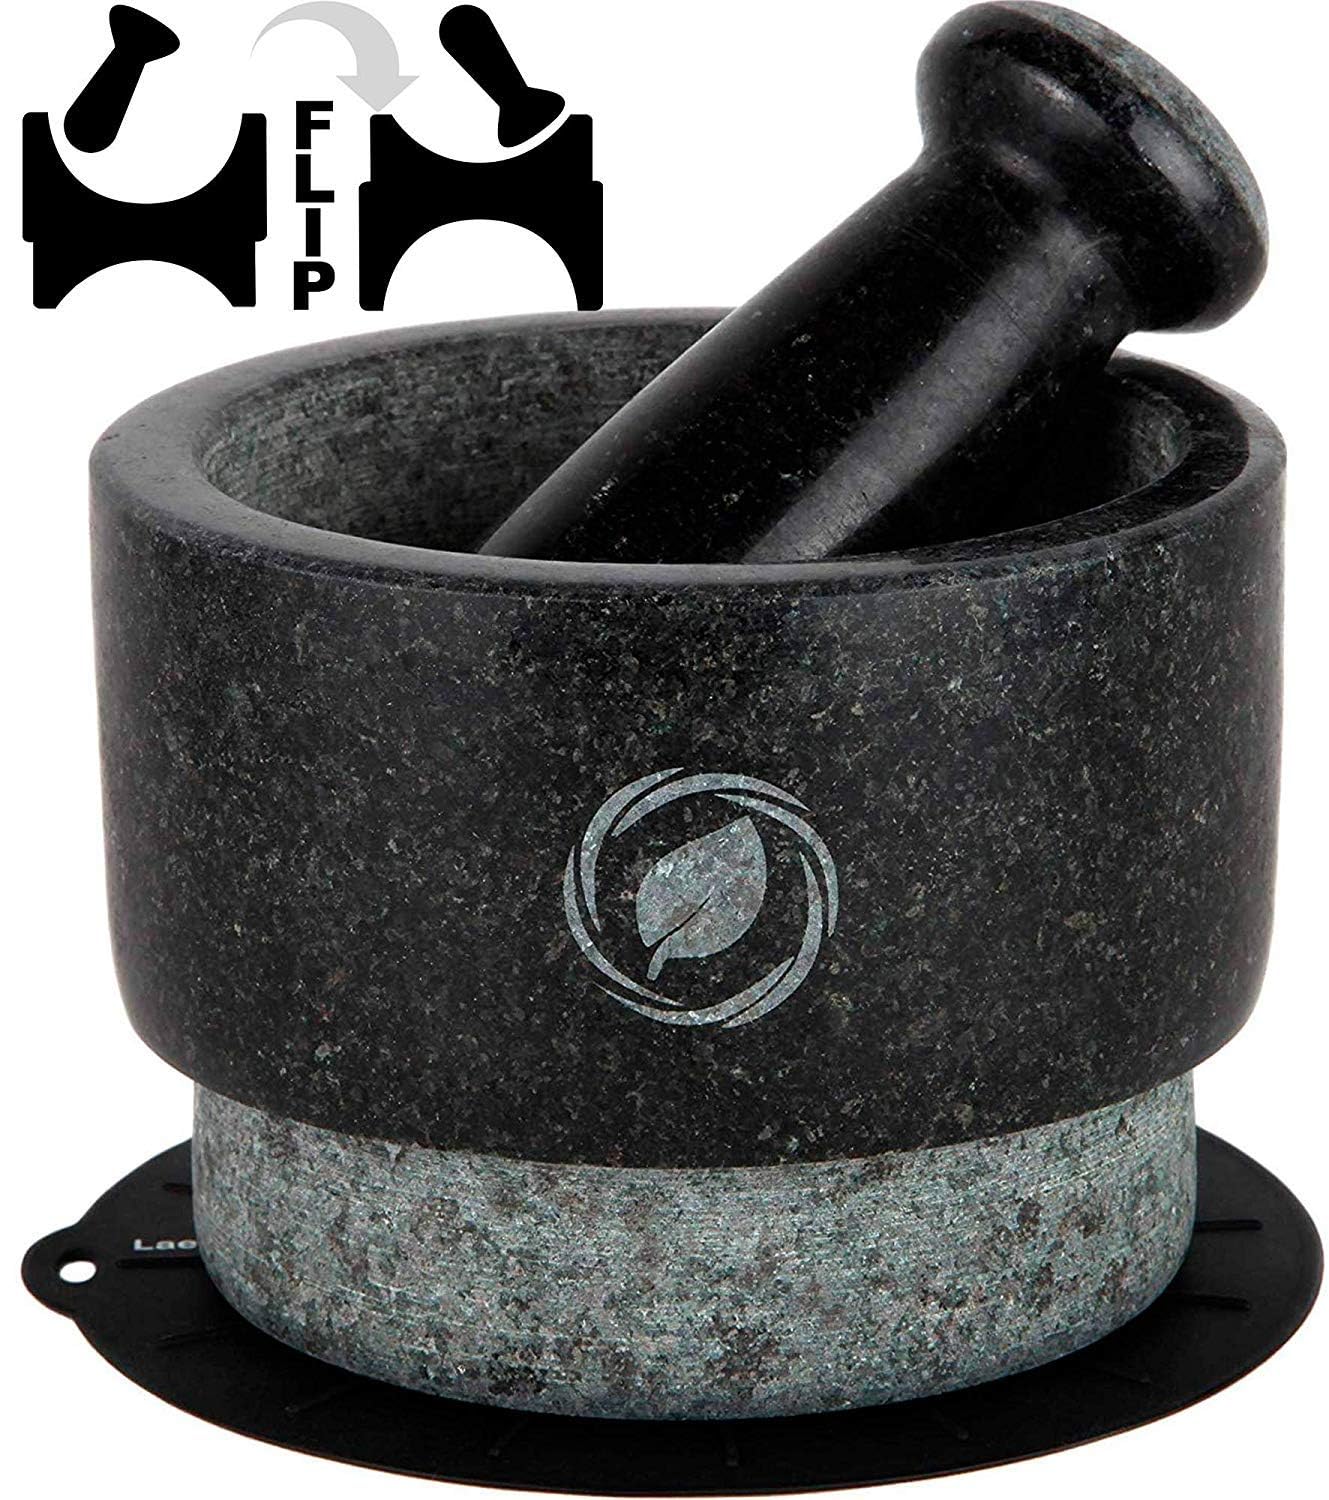 Laevo Mortar and Pestle Set (Large) | Stone Spice Grinder | 2.1 Cup Capacity | 5.5 inch | Reversible | Molcajete Mexicano | Guacamole, Pesto, Spices | Large Mortar & Pestles | Gift Set  - Good